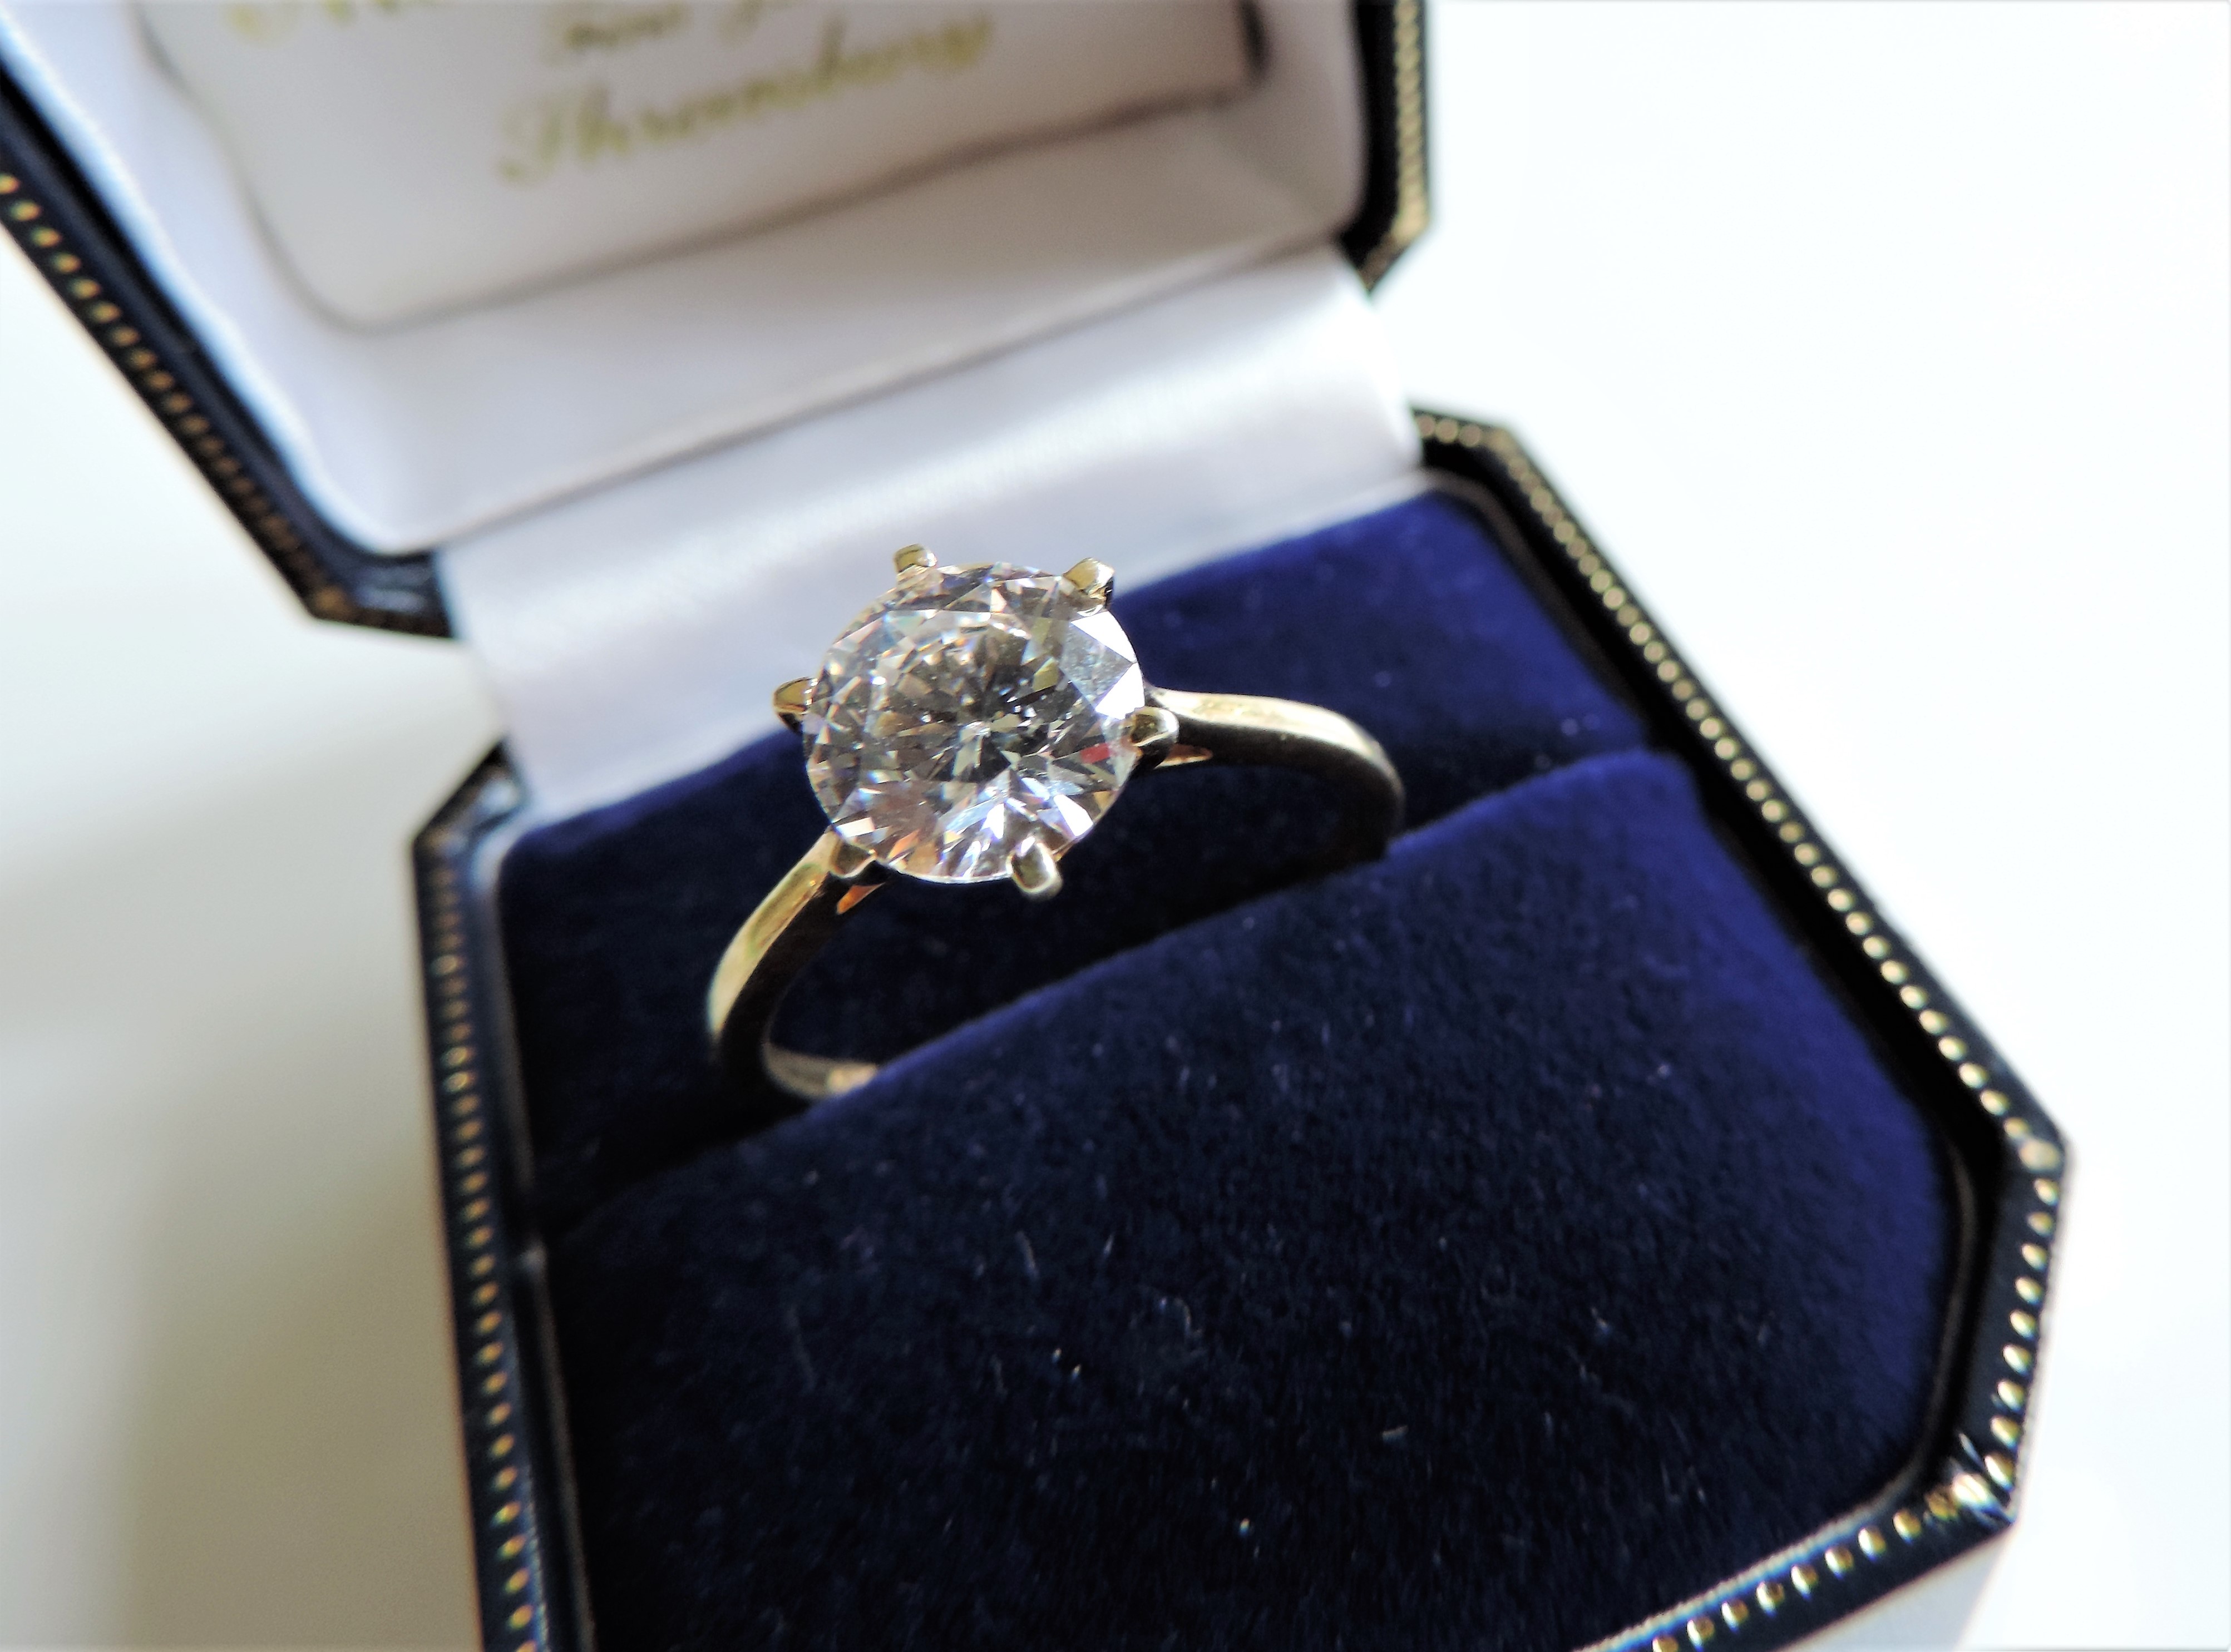 Gold on Sterling Silver 2ct Moissanite Solitaire Ring - Image 2 of 5